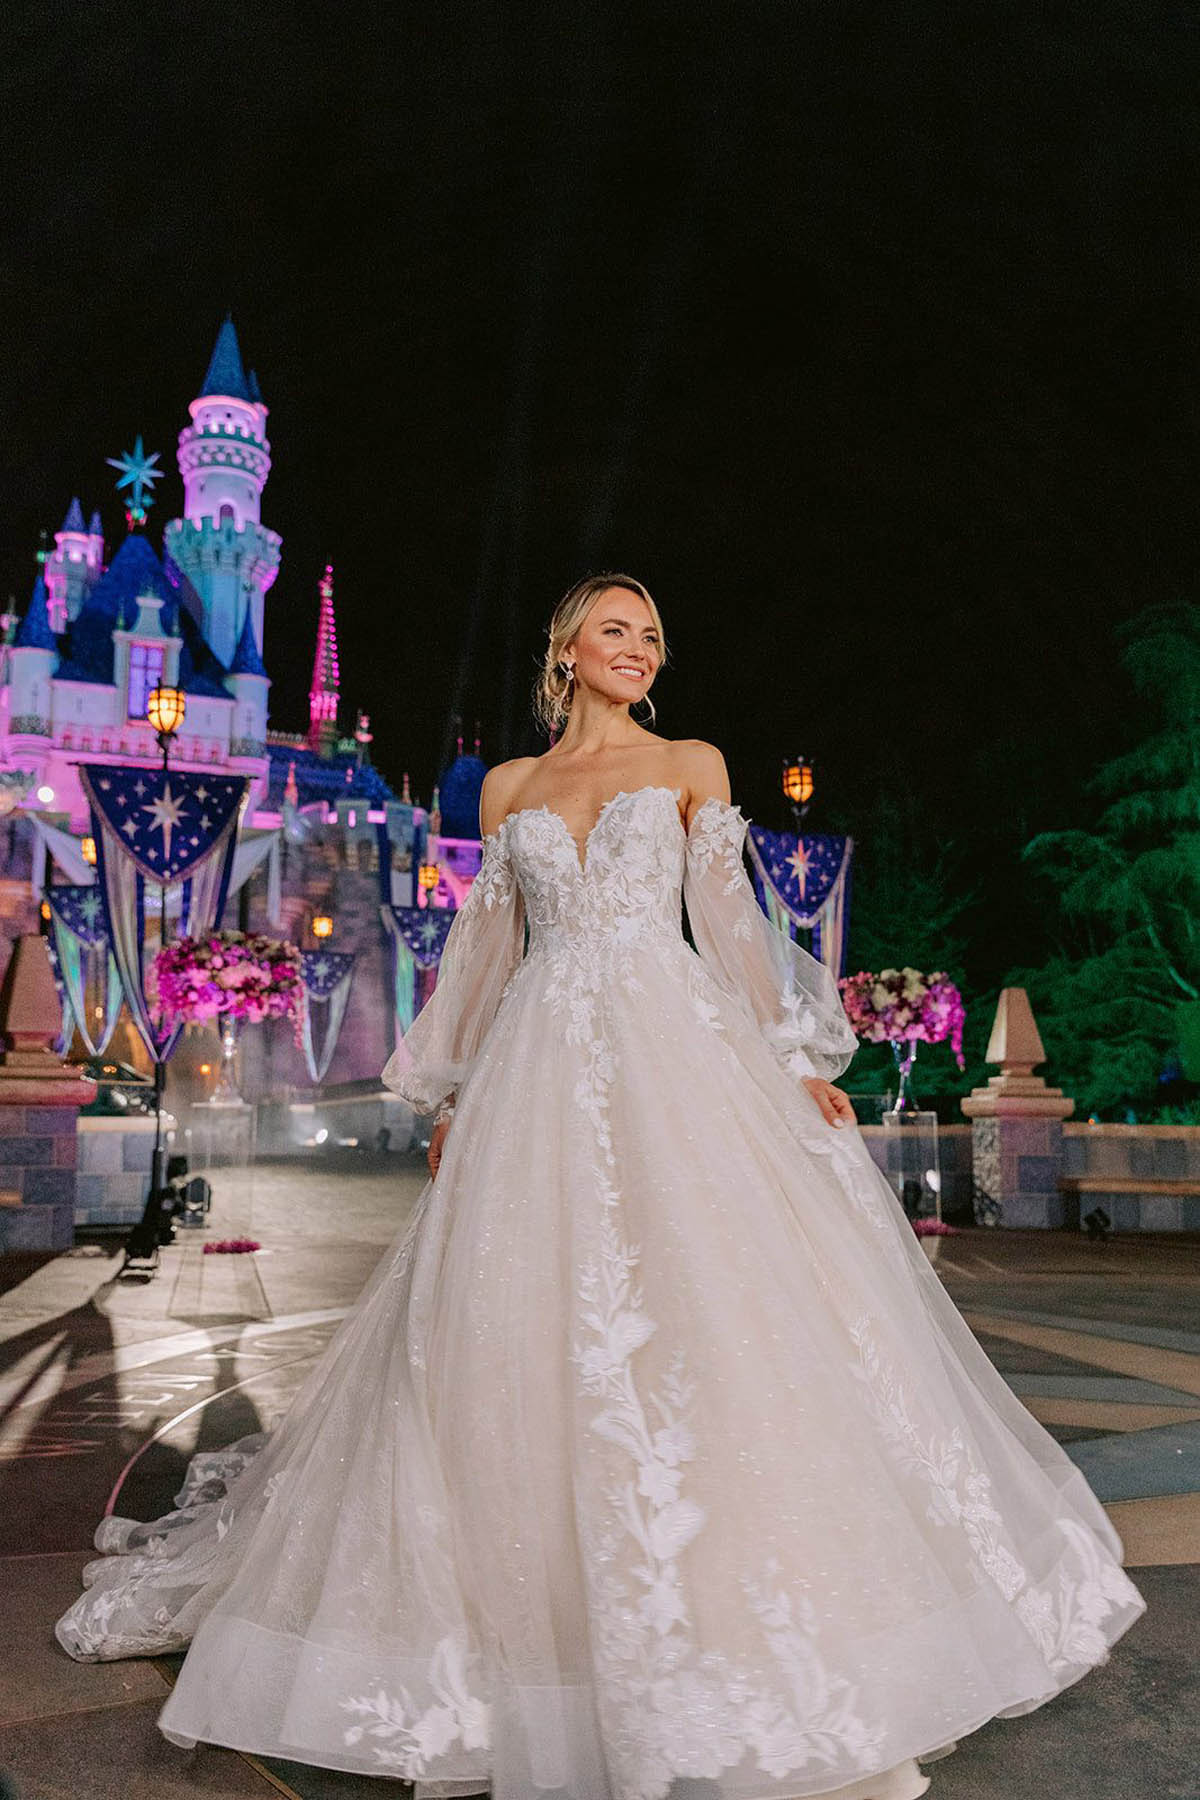 A blonde person models a princess-inspired off-the-shoulder white gown.